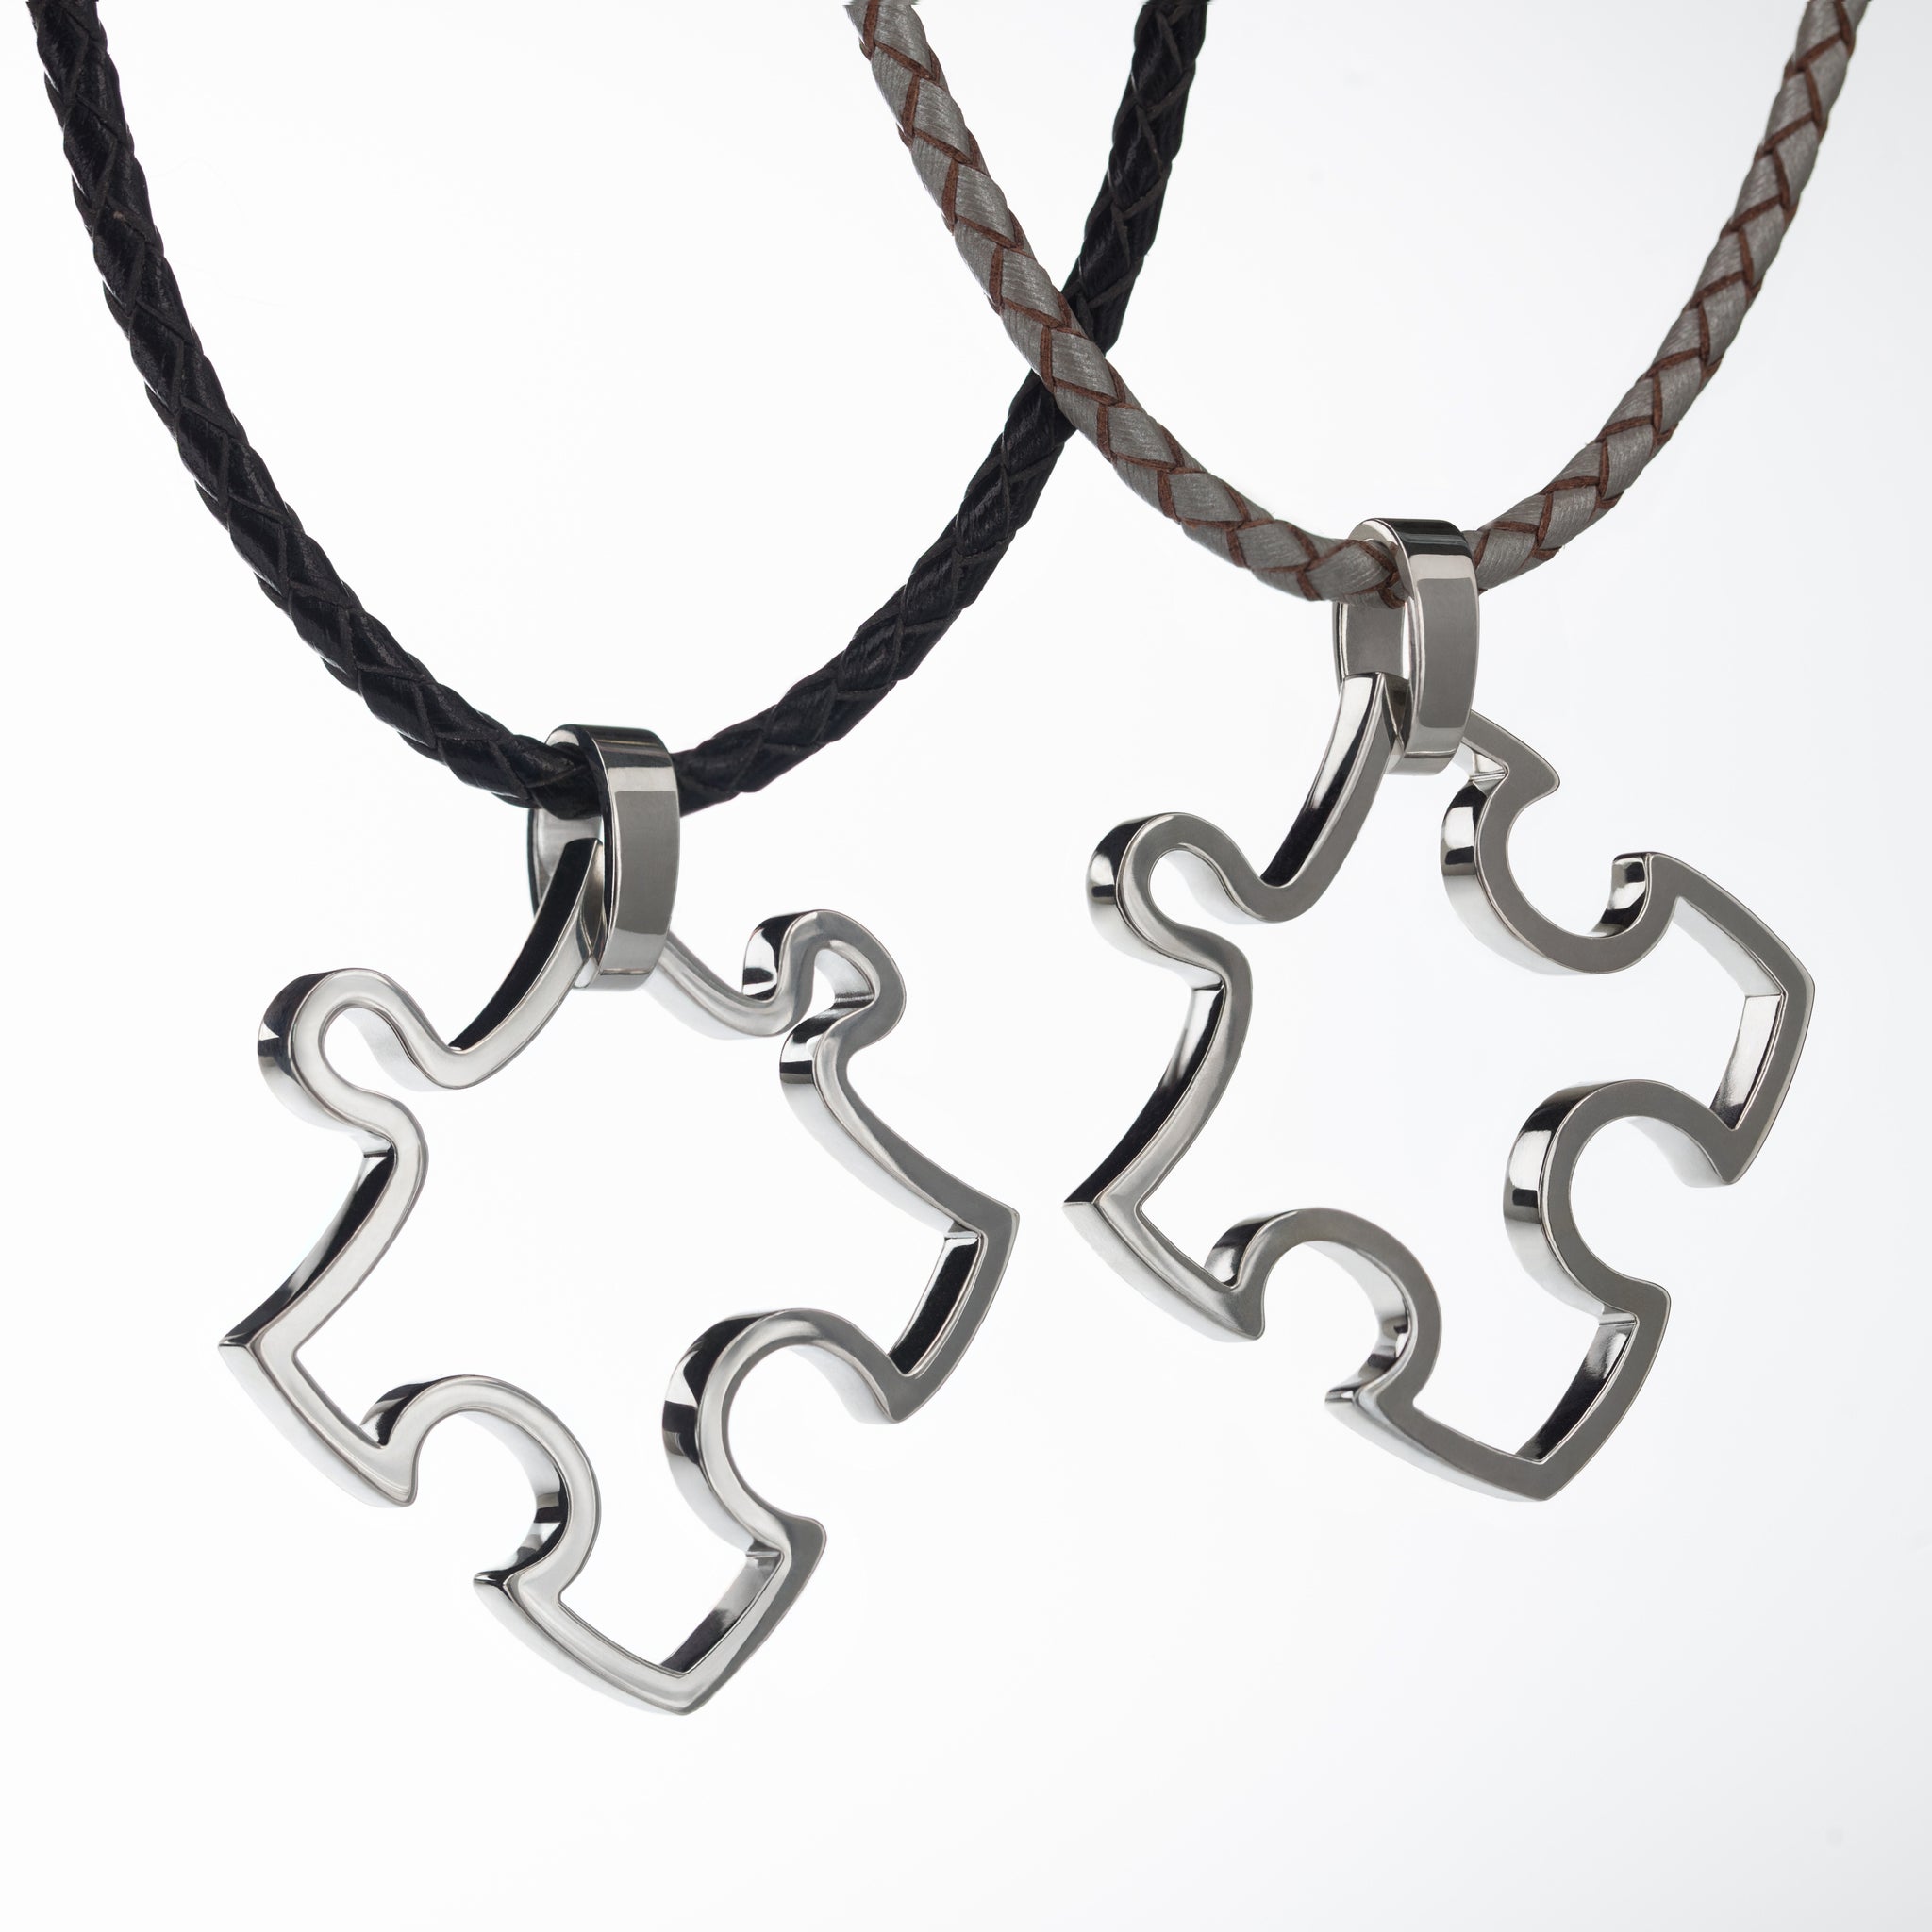 Two conceptual puzzle  pendants made of stainless steal